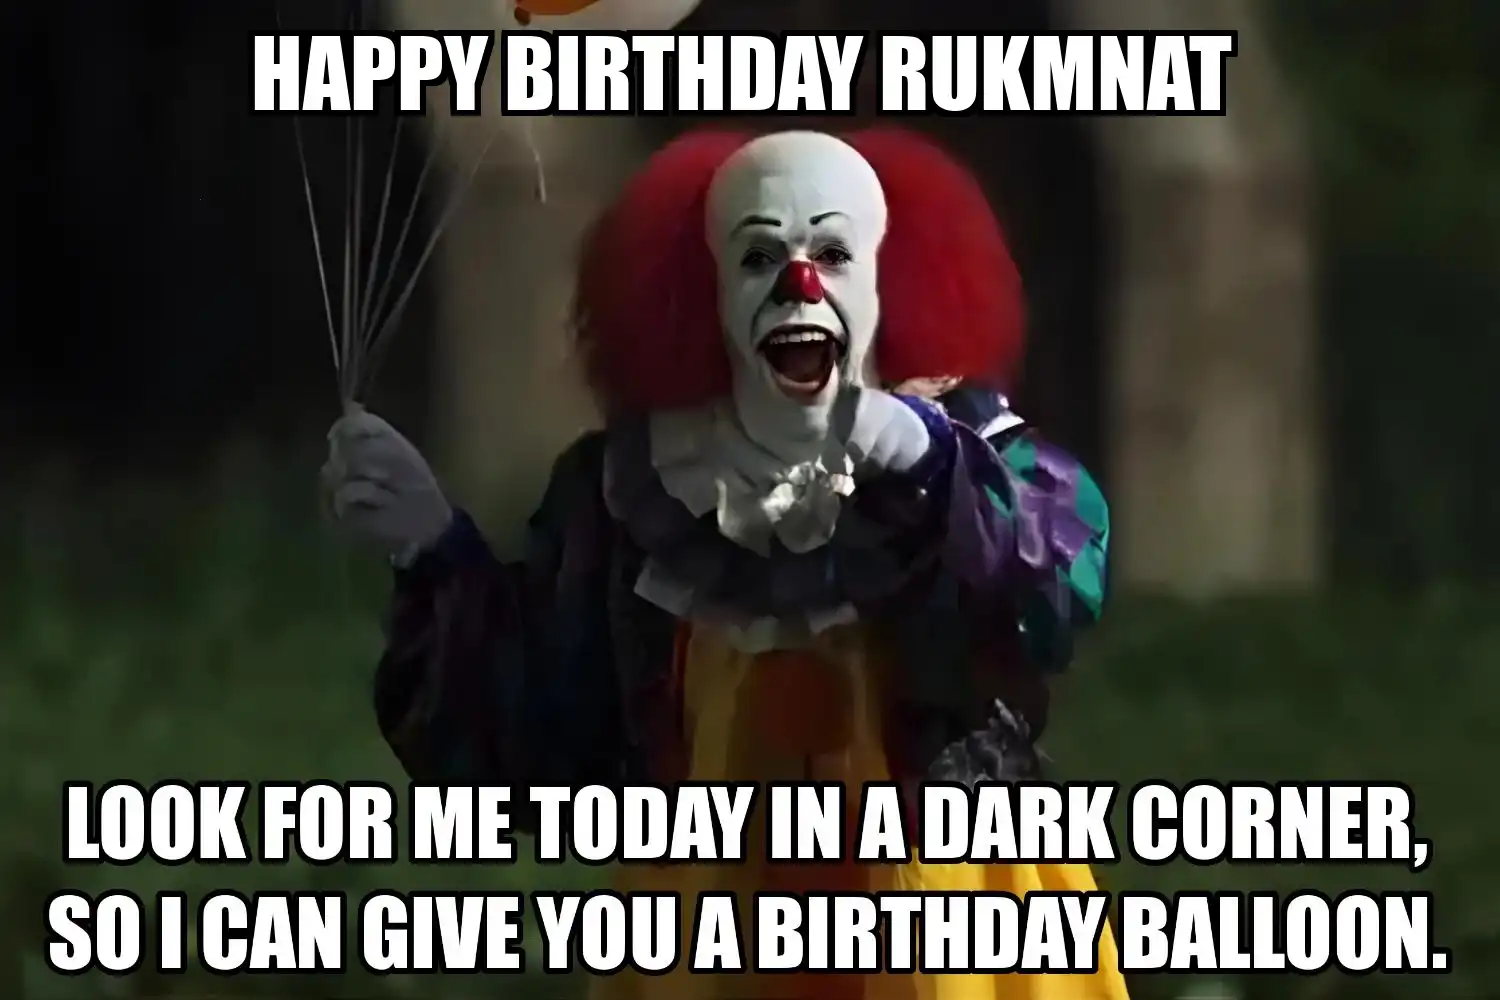 Happy Birthday Rukmnat I Can Give You A Balloon Meme